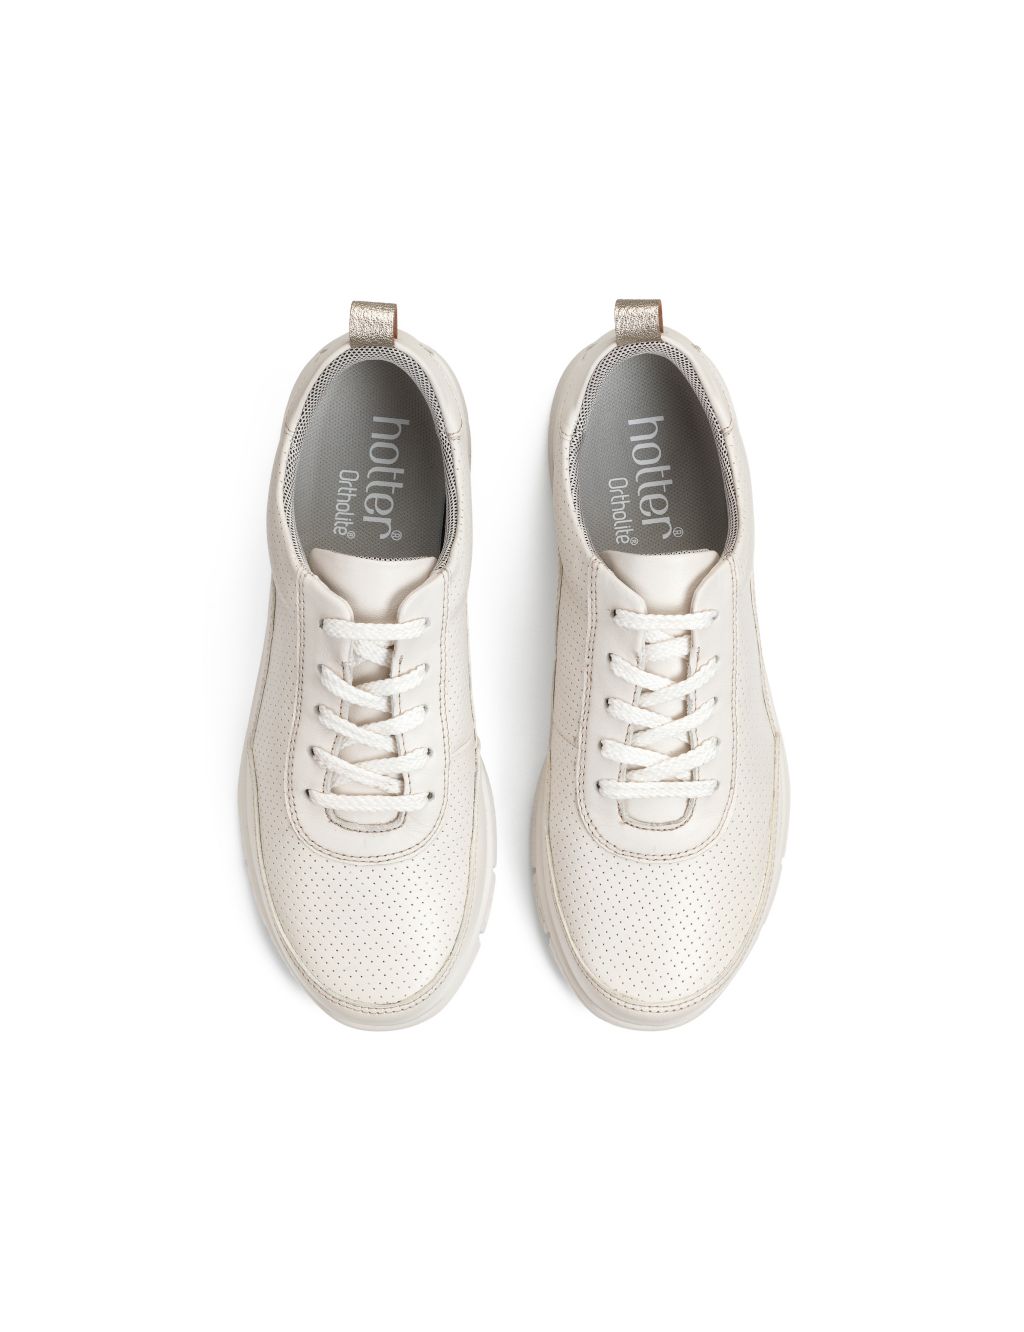 Wide Fit Leather Lace Up Trainers image 2